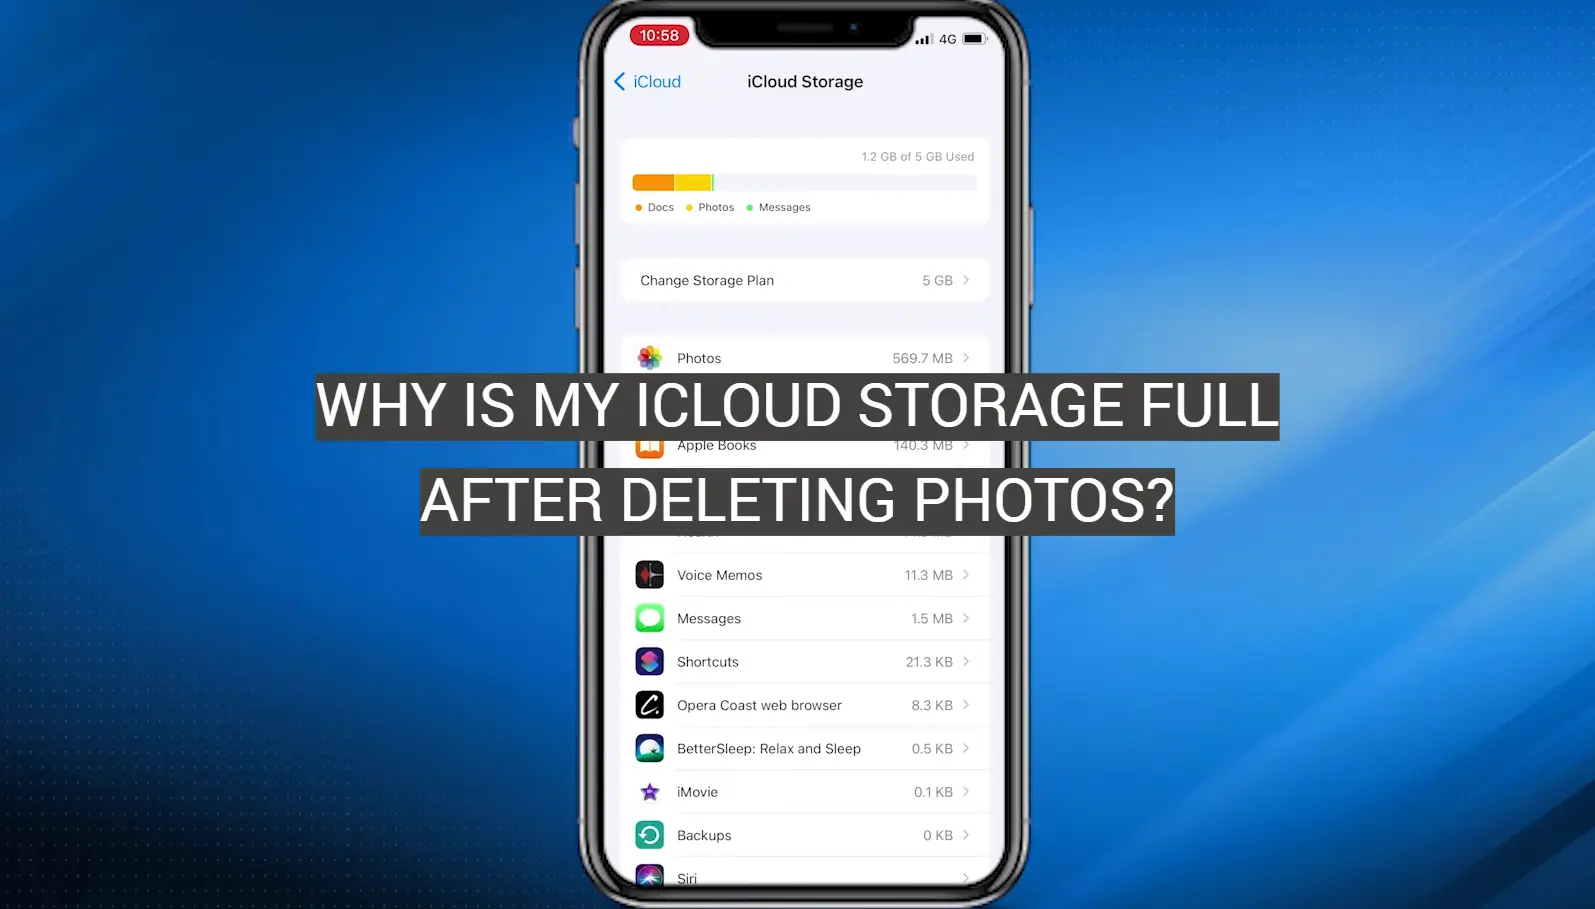 Why Is My iCloud Storage Full After Deleting Photos?